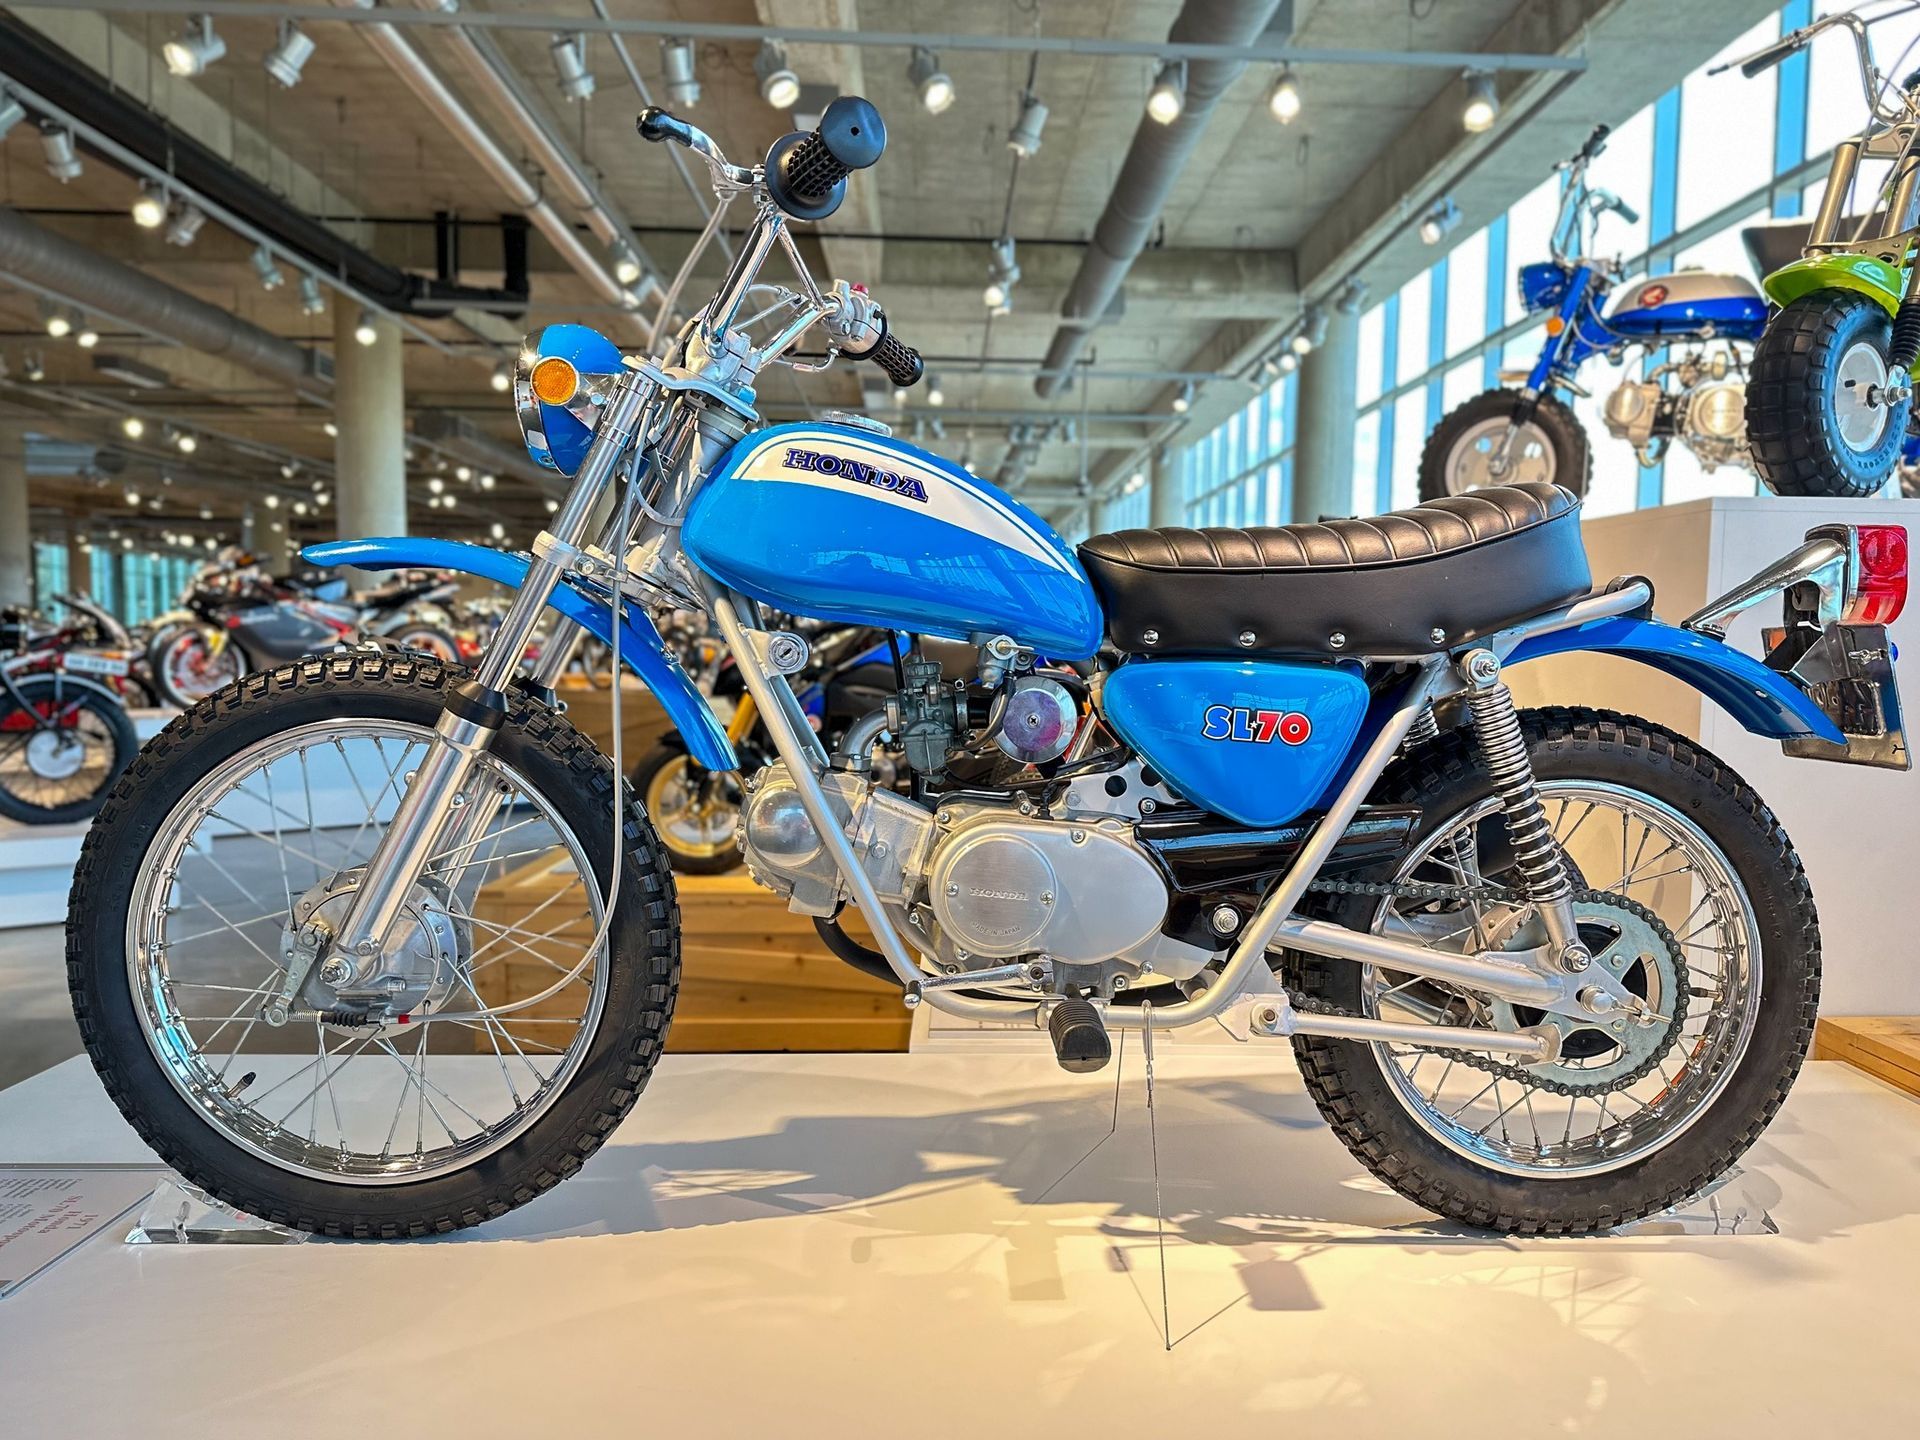 World's Largest Motorcycle Museum: world record in Birmingham, Alabama